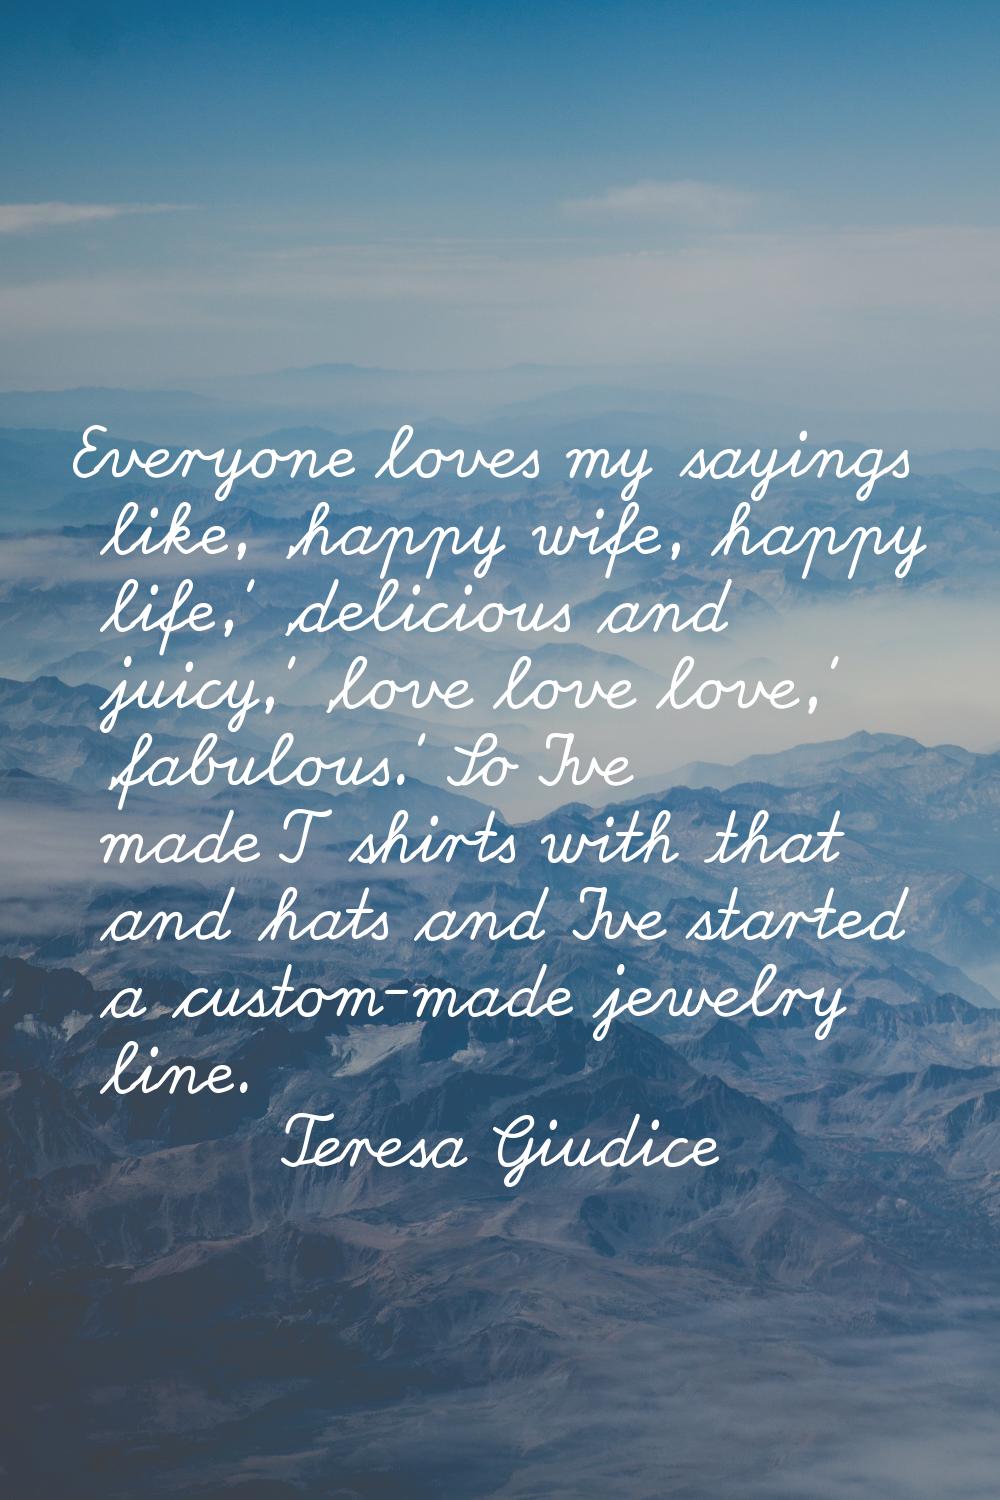 Everyone loves my sayings like, 'happy wife, happy life,' 'delicious and juicy,' 'love love love,' 